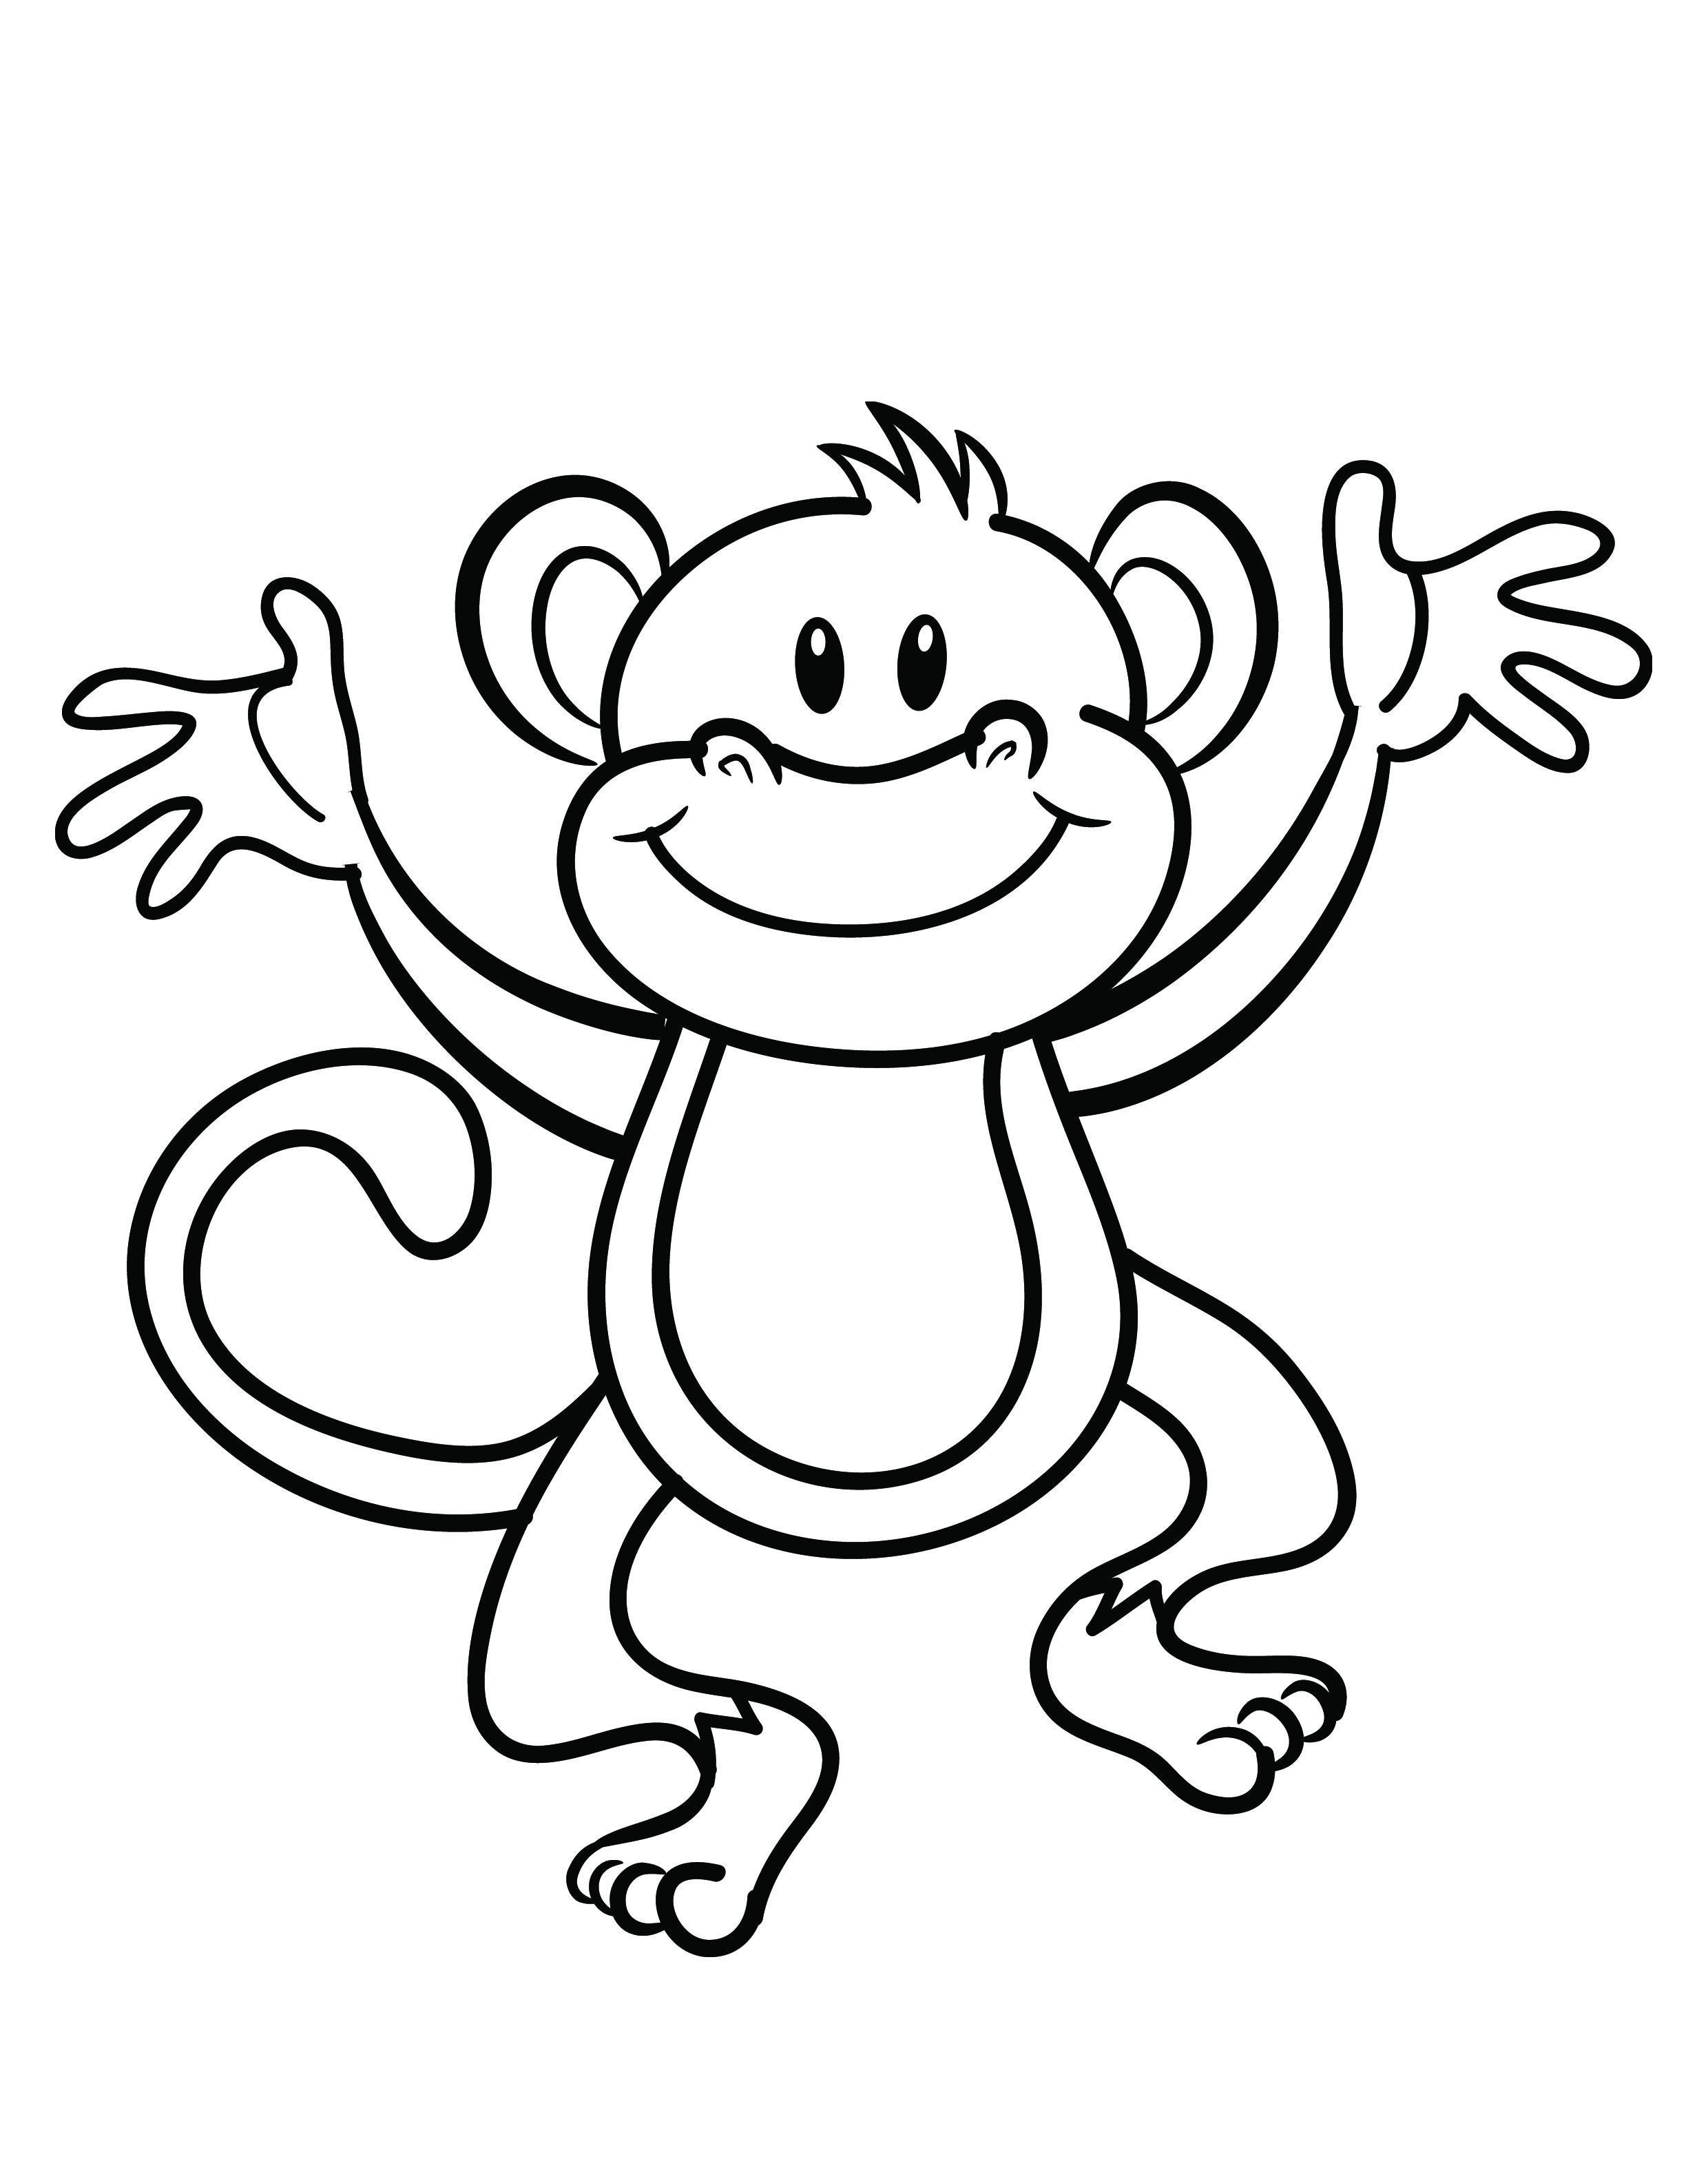 Monkey coloring pages.